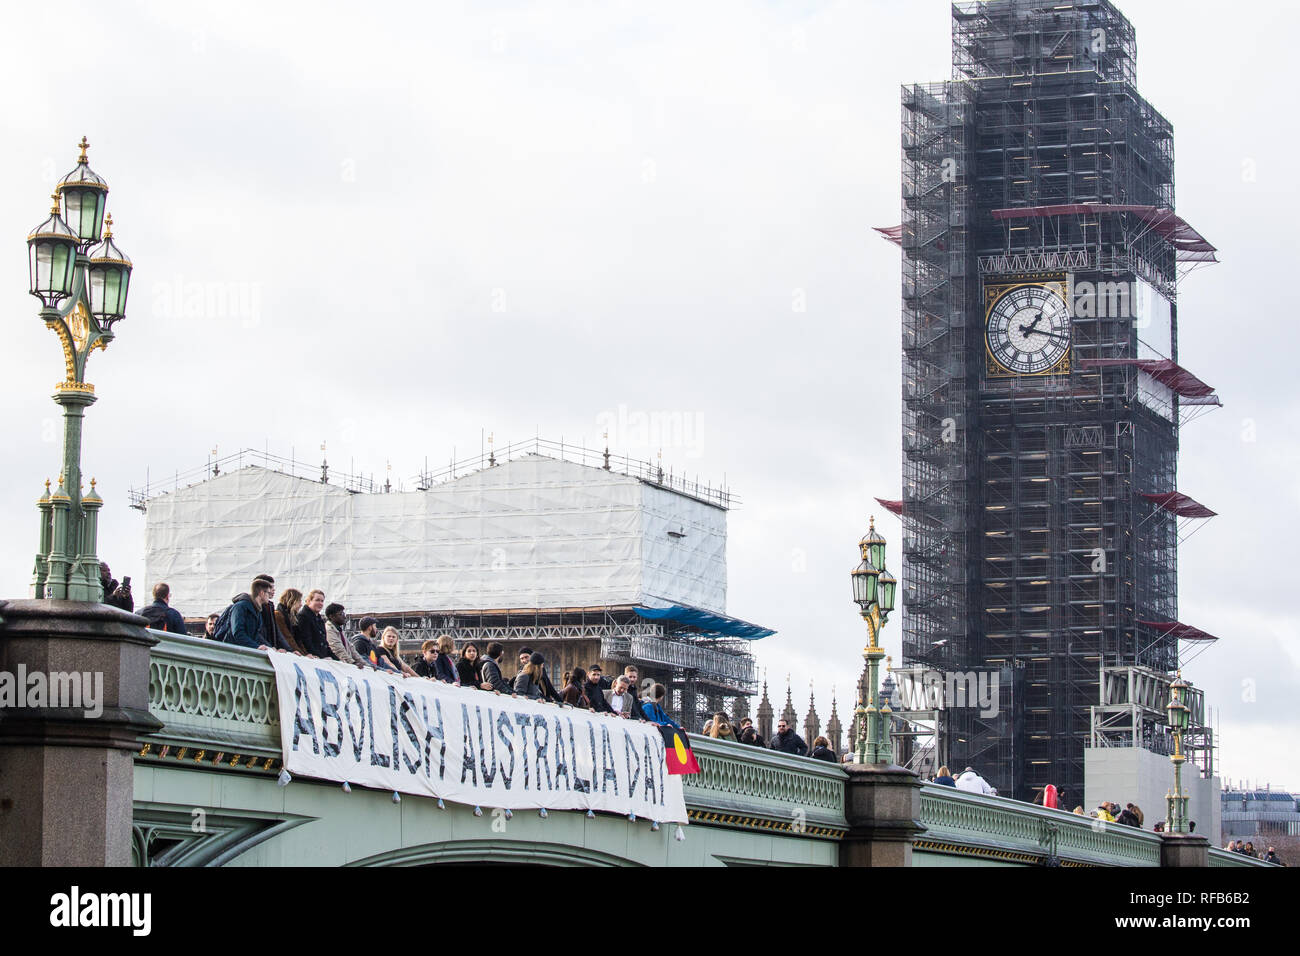 London, UK. 25th January, 2019. Activists drop a banner from Westminster Bridge, in view of the Houses of Parliament, to call for the abolition of Australia Day in advance of rallies in every Australian city tomorrow. The event was organised in solidarity with Aboriginal and Torres Strait Islander people who consider Australia Day, a day celebrating the colonisation of Australia, to be a day of mourning rather than a day of celebration. Credit: Mark Kerrison/Alamy Live News Stock Photo